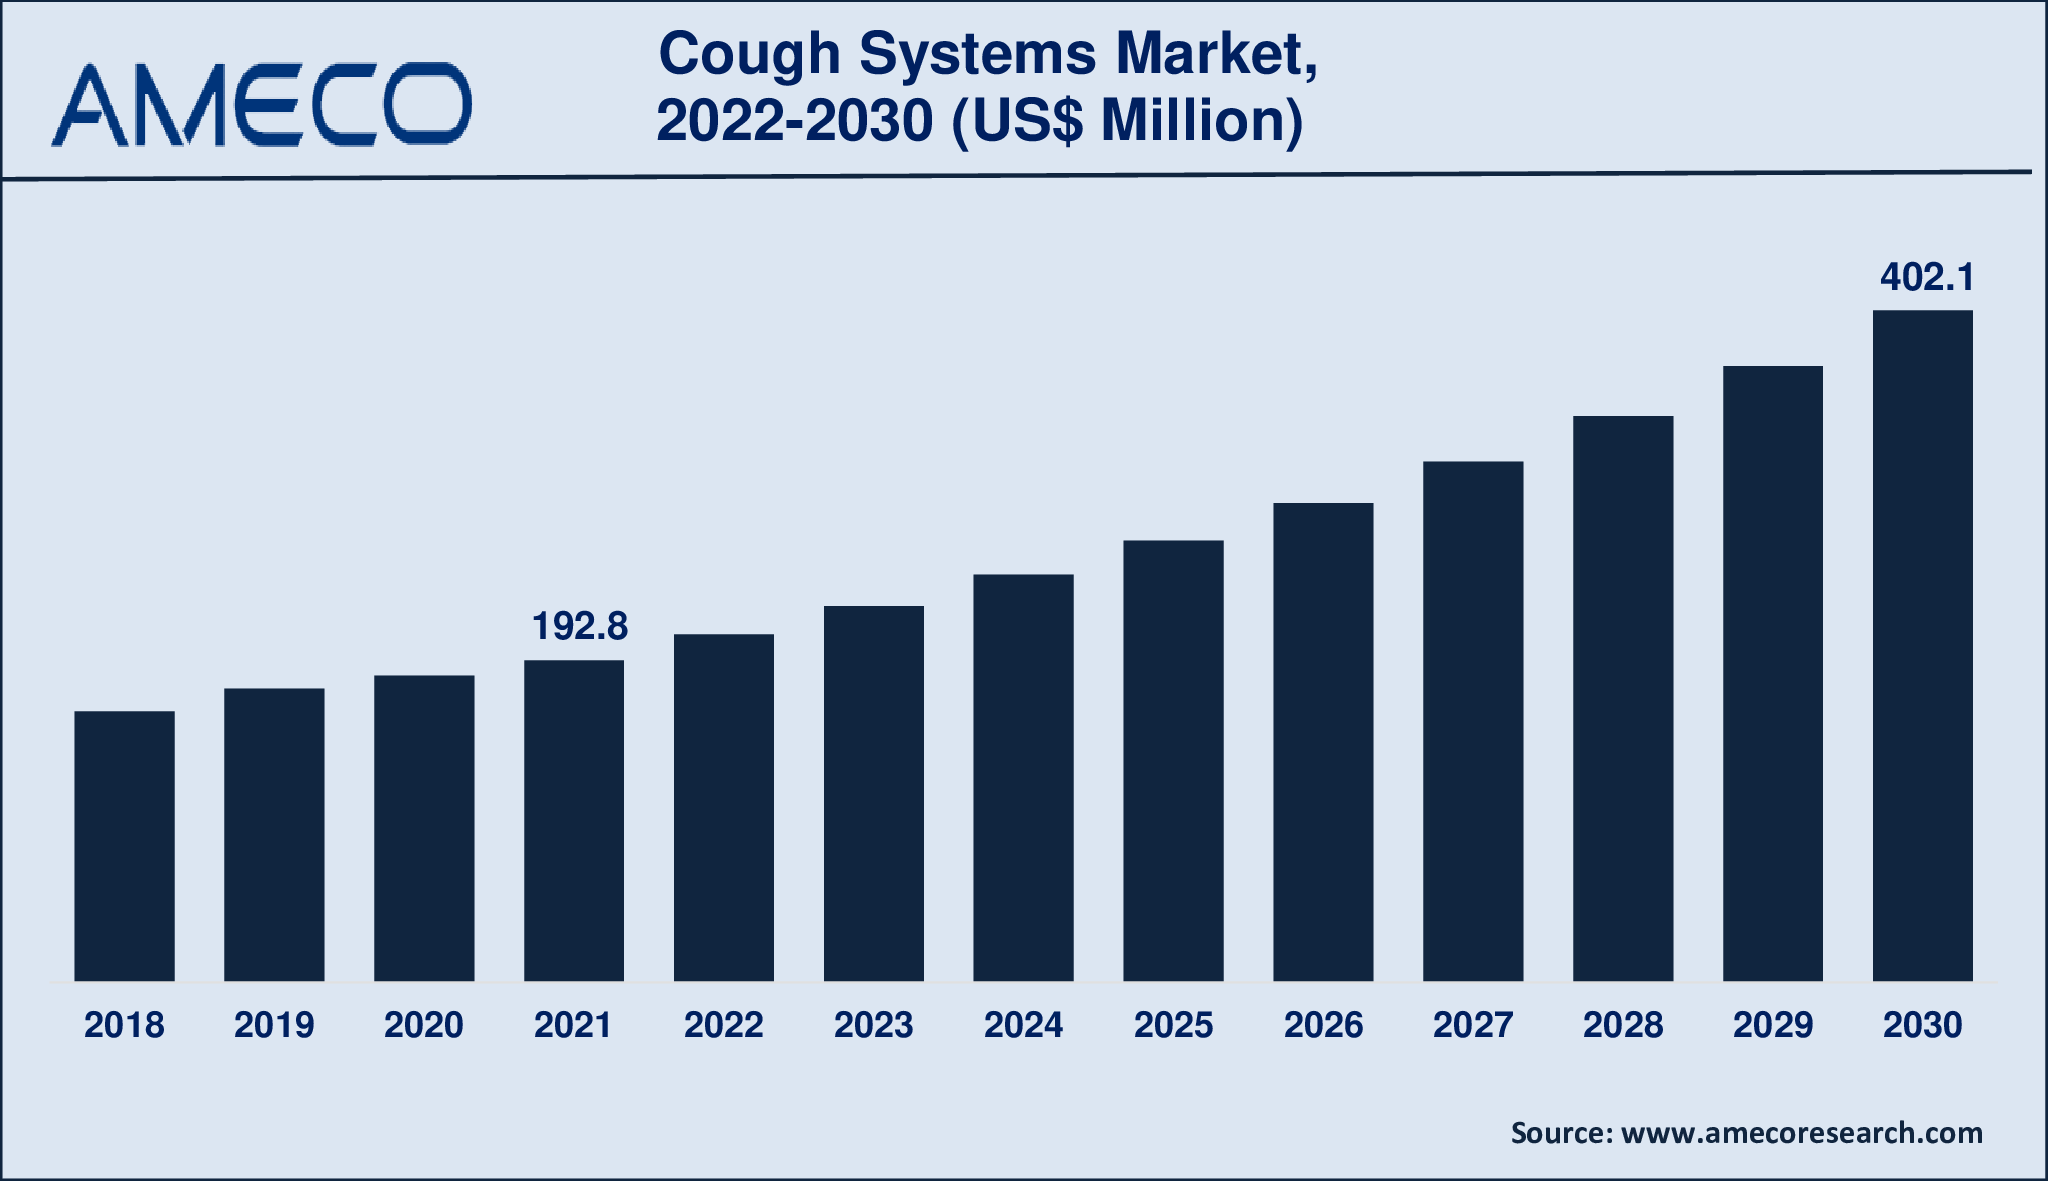 Cough Systems Market Size, Share, Growth, Trends, and Forecast 2022-2030